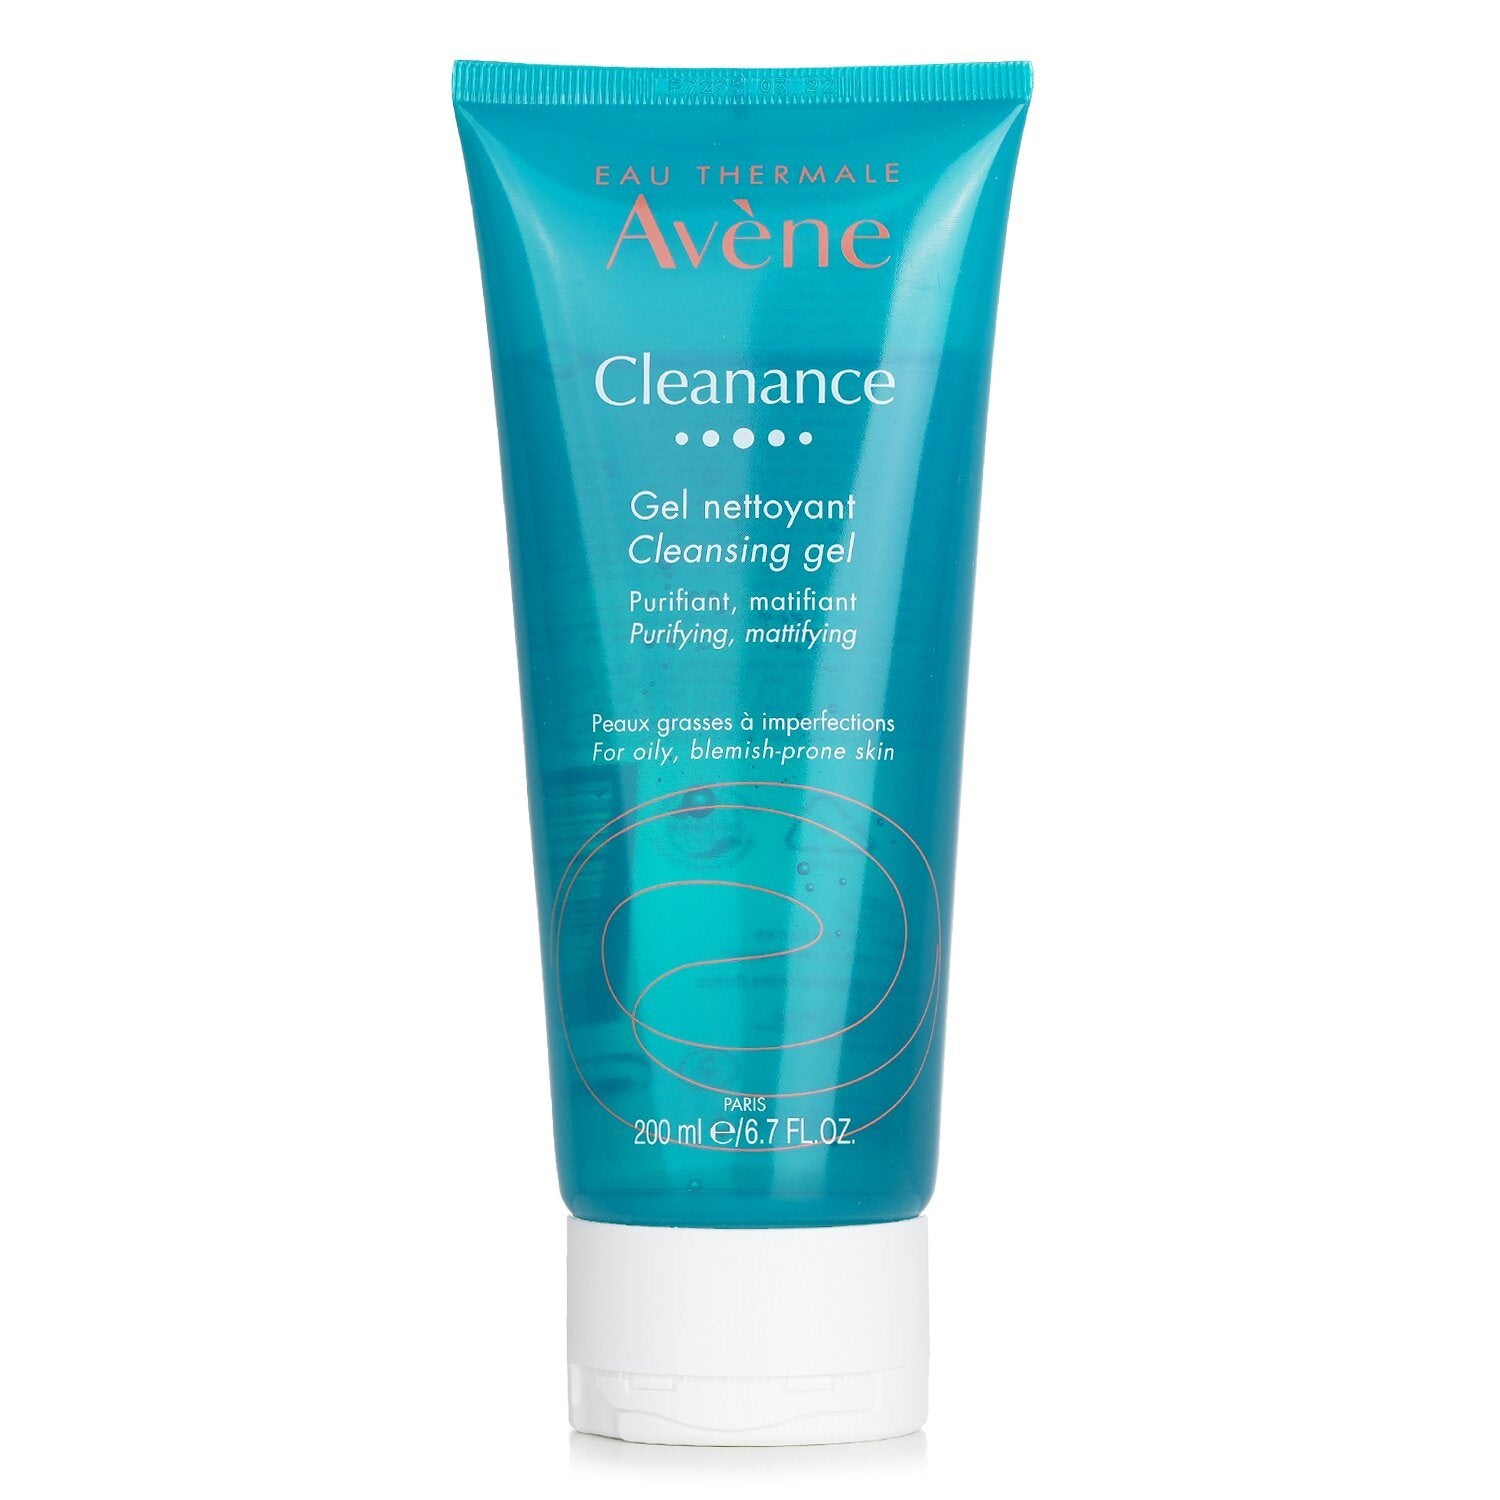 Tube of AVENE - Cleanance Cleansing Gel for oily, blemish-prone skin on a white background.